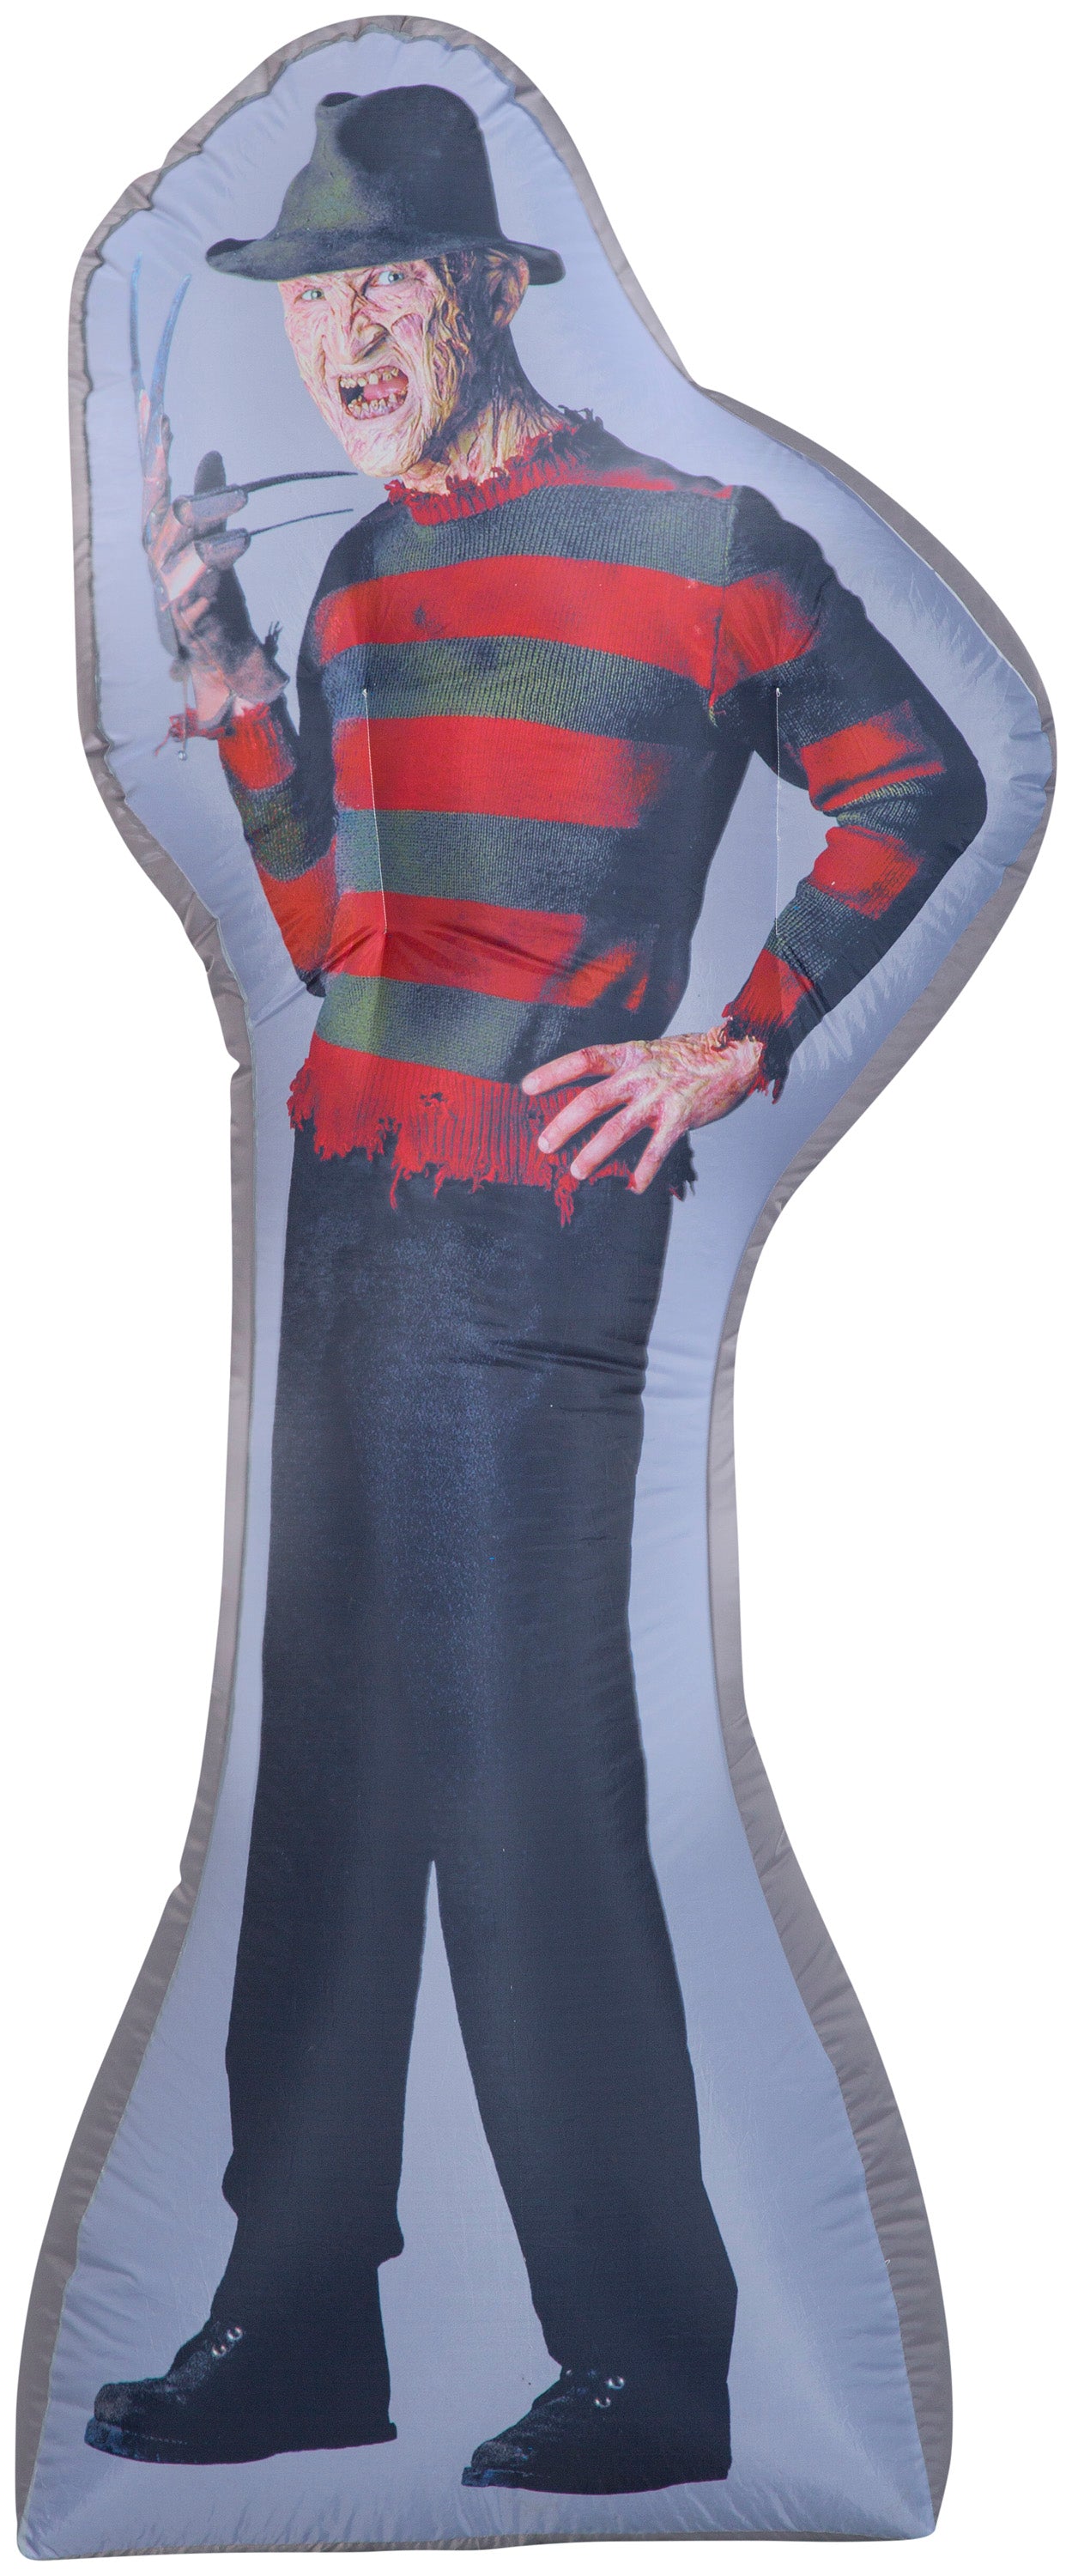 6' Photorealistic Airblown Freddy Kruger Halloween Inflatable